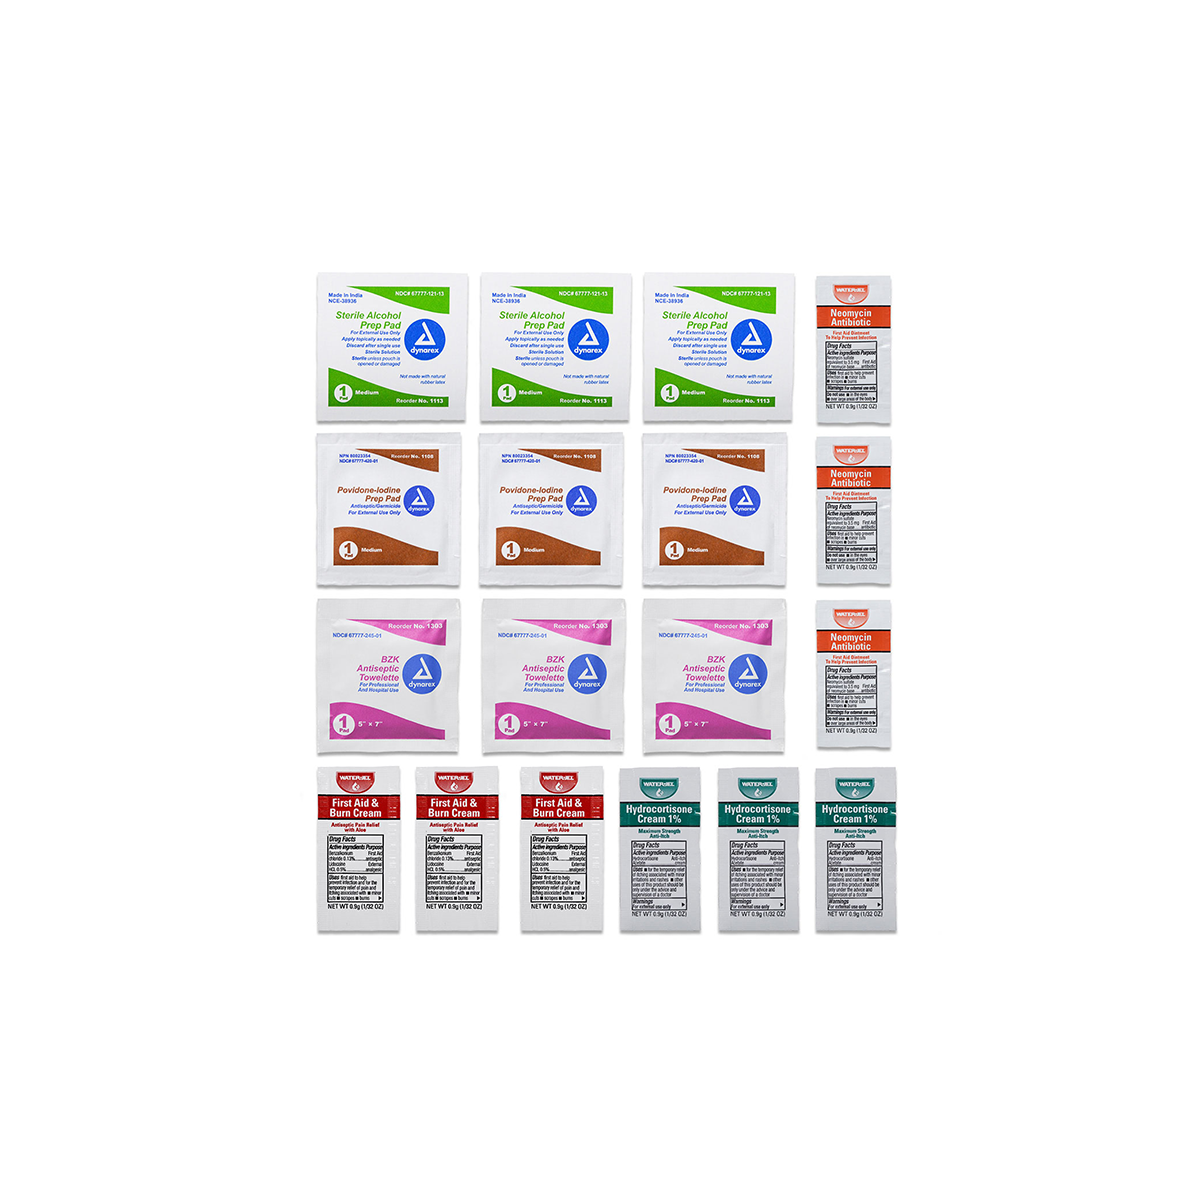 Picture of the topical ointments antiseptic wipe refill kit assortment.